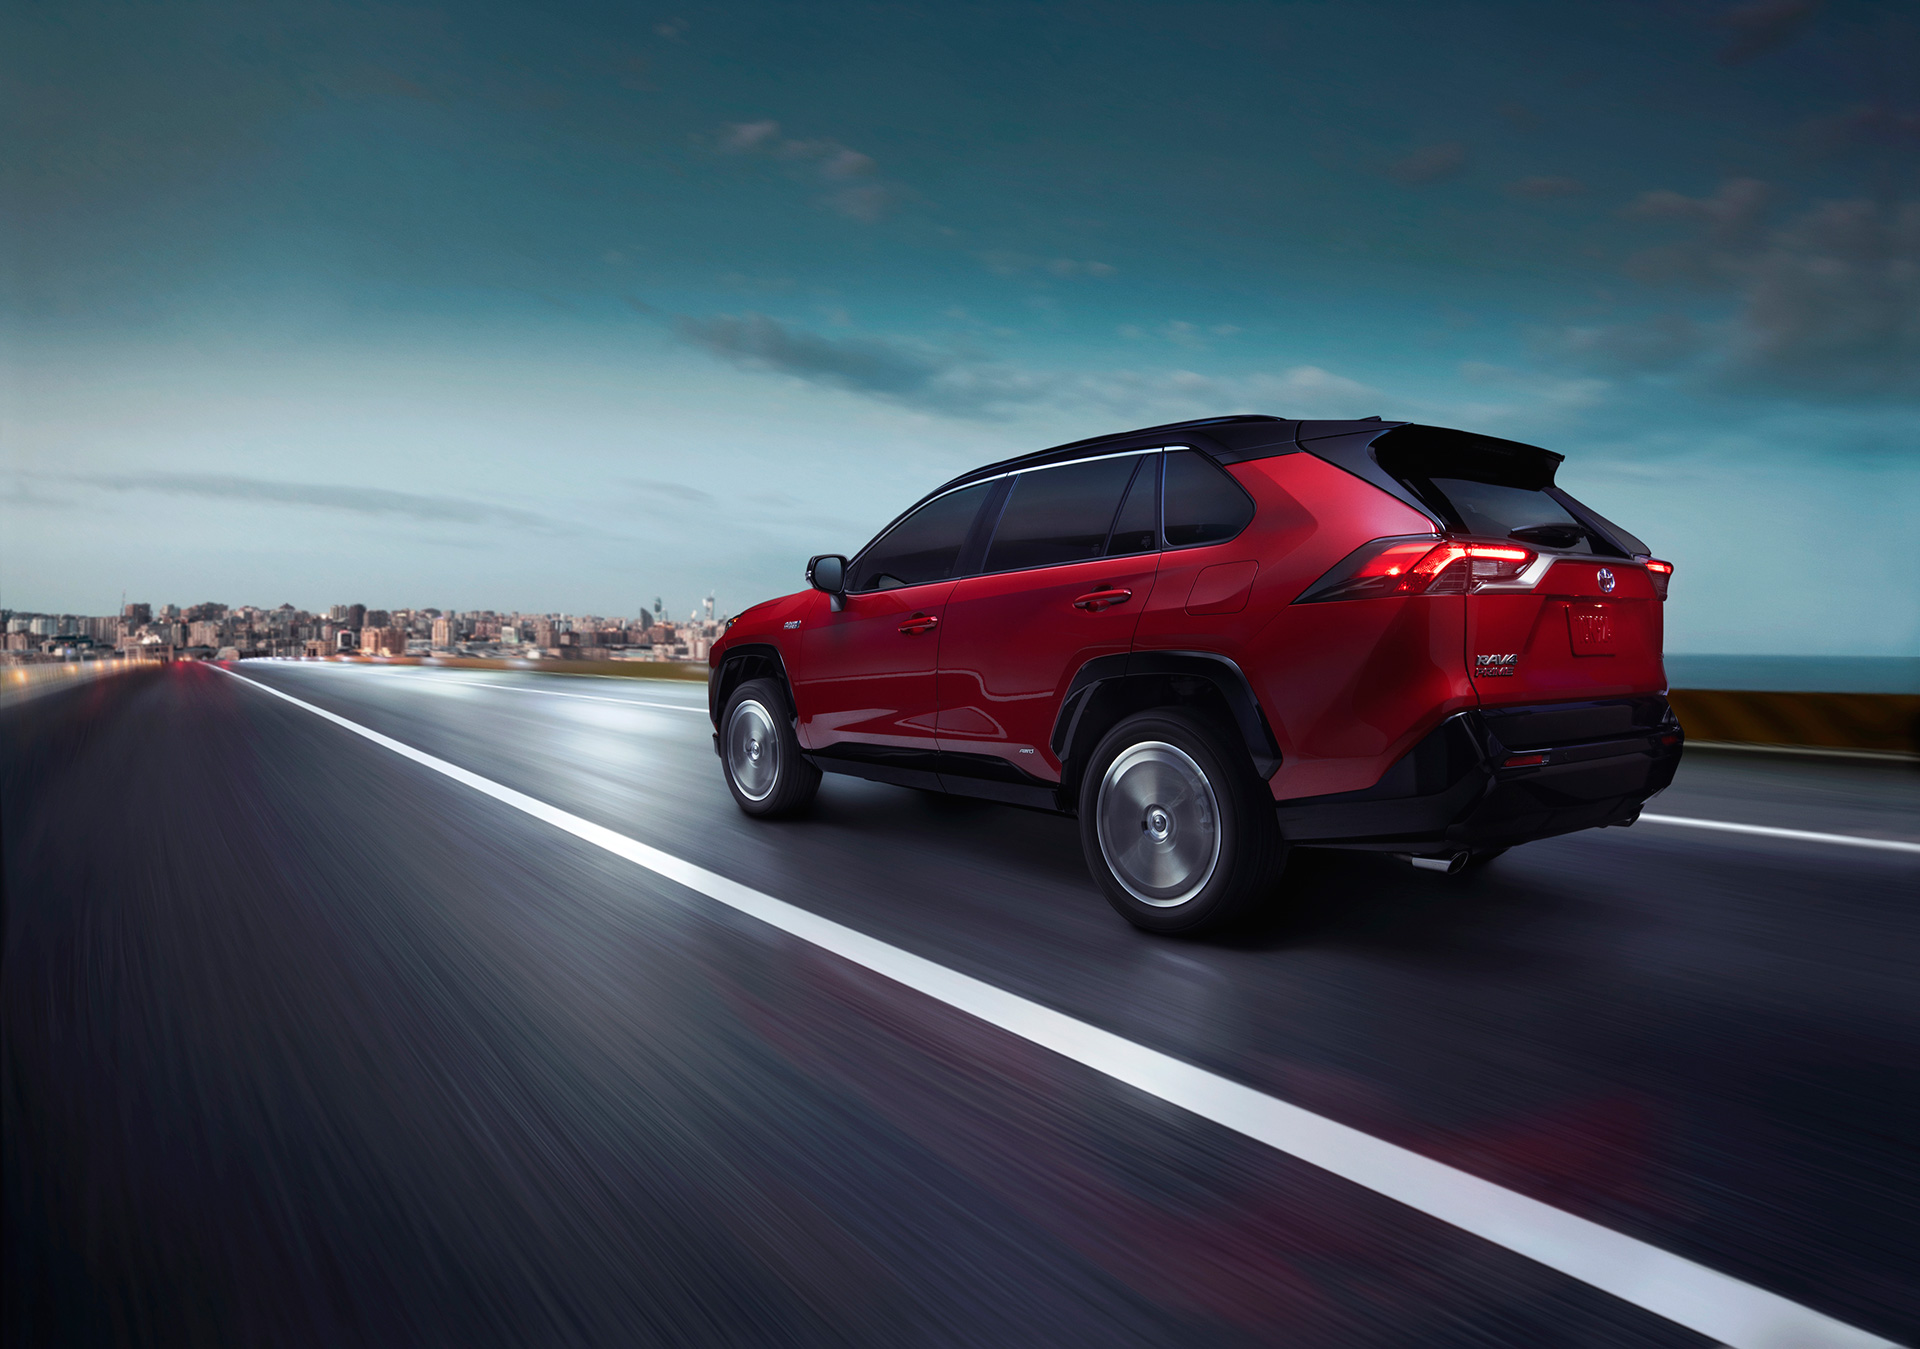 Toyota Revs Up Lineup with New 302-Horsepower RAV4 Prime - Image 7